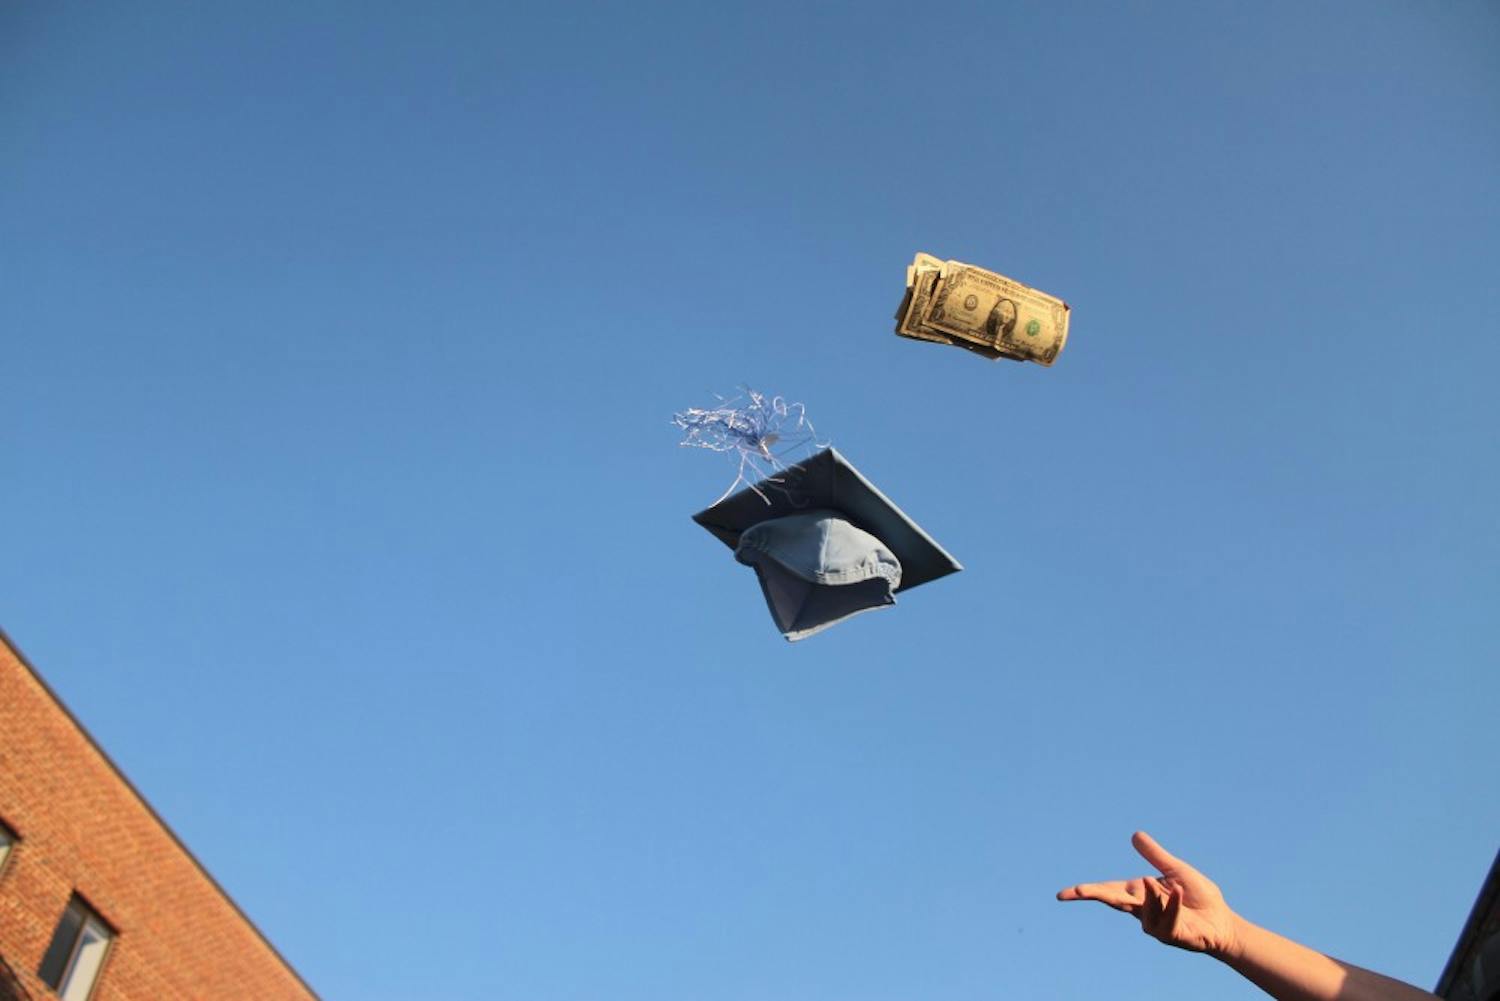 College graduation has become an expensive milestone in one’s life. Many people forget certain costs, such as those of a cap and gown.